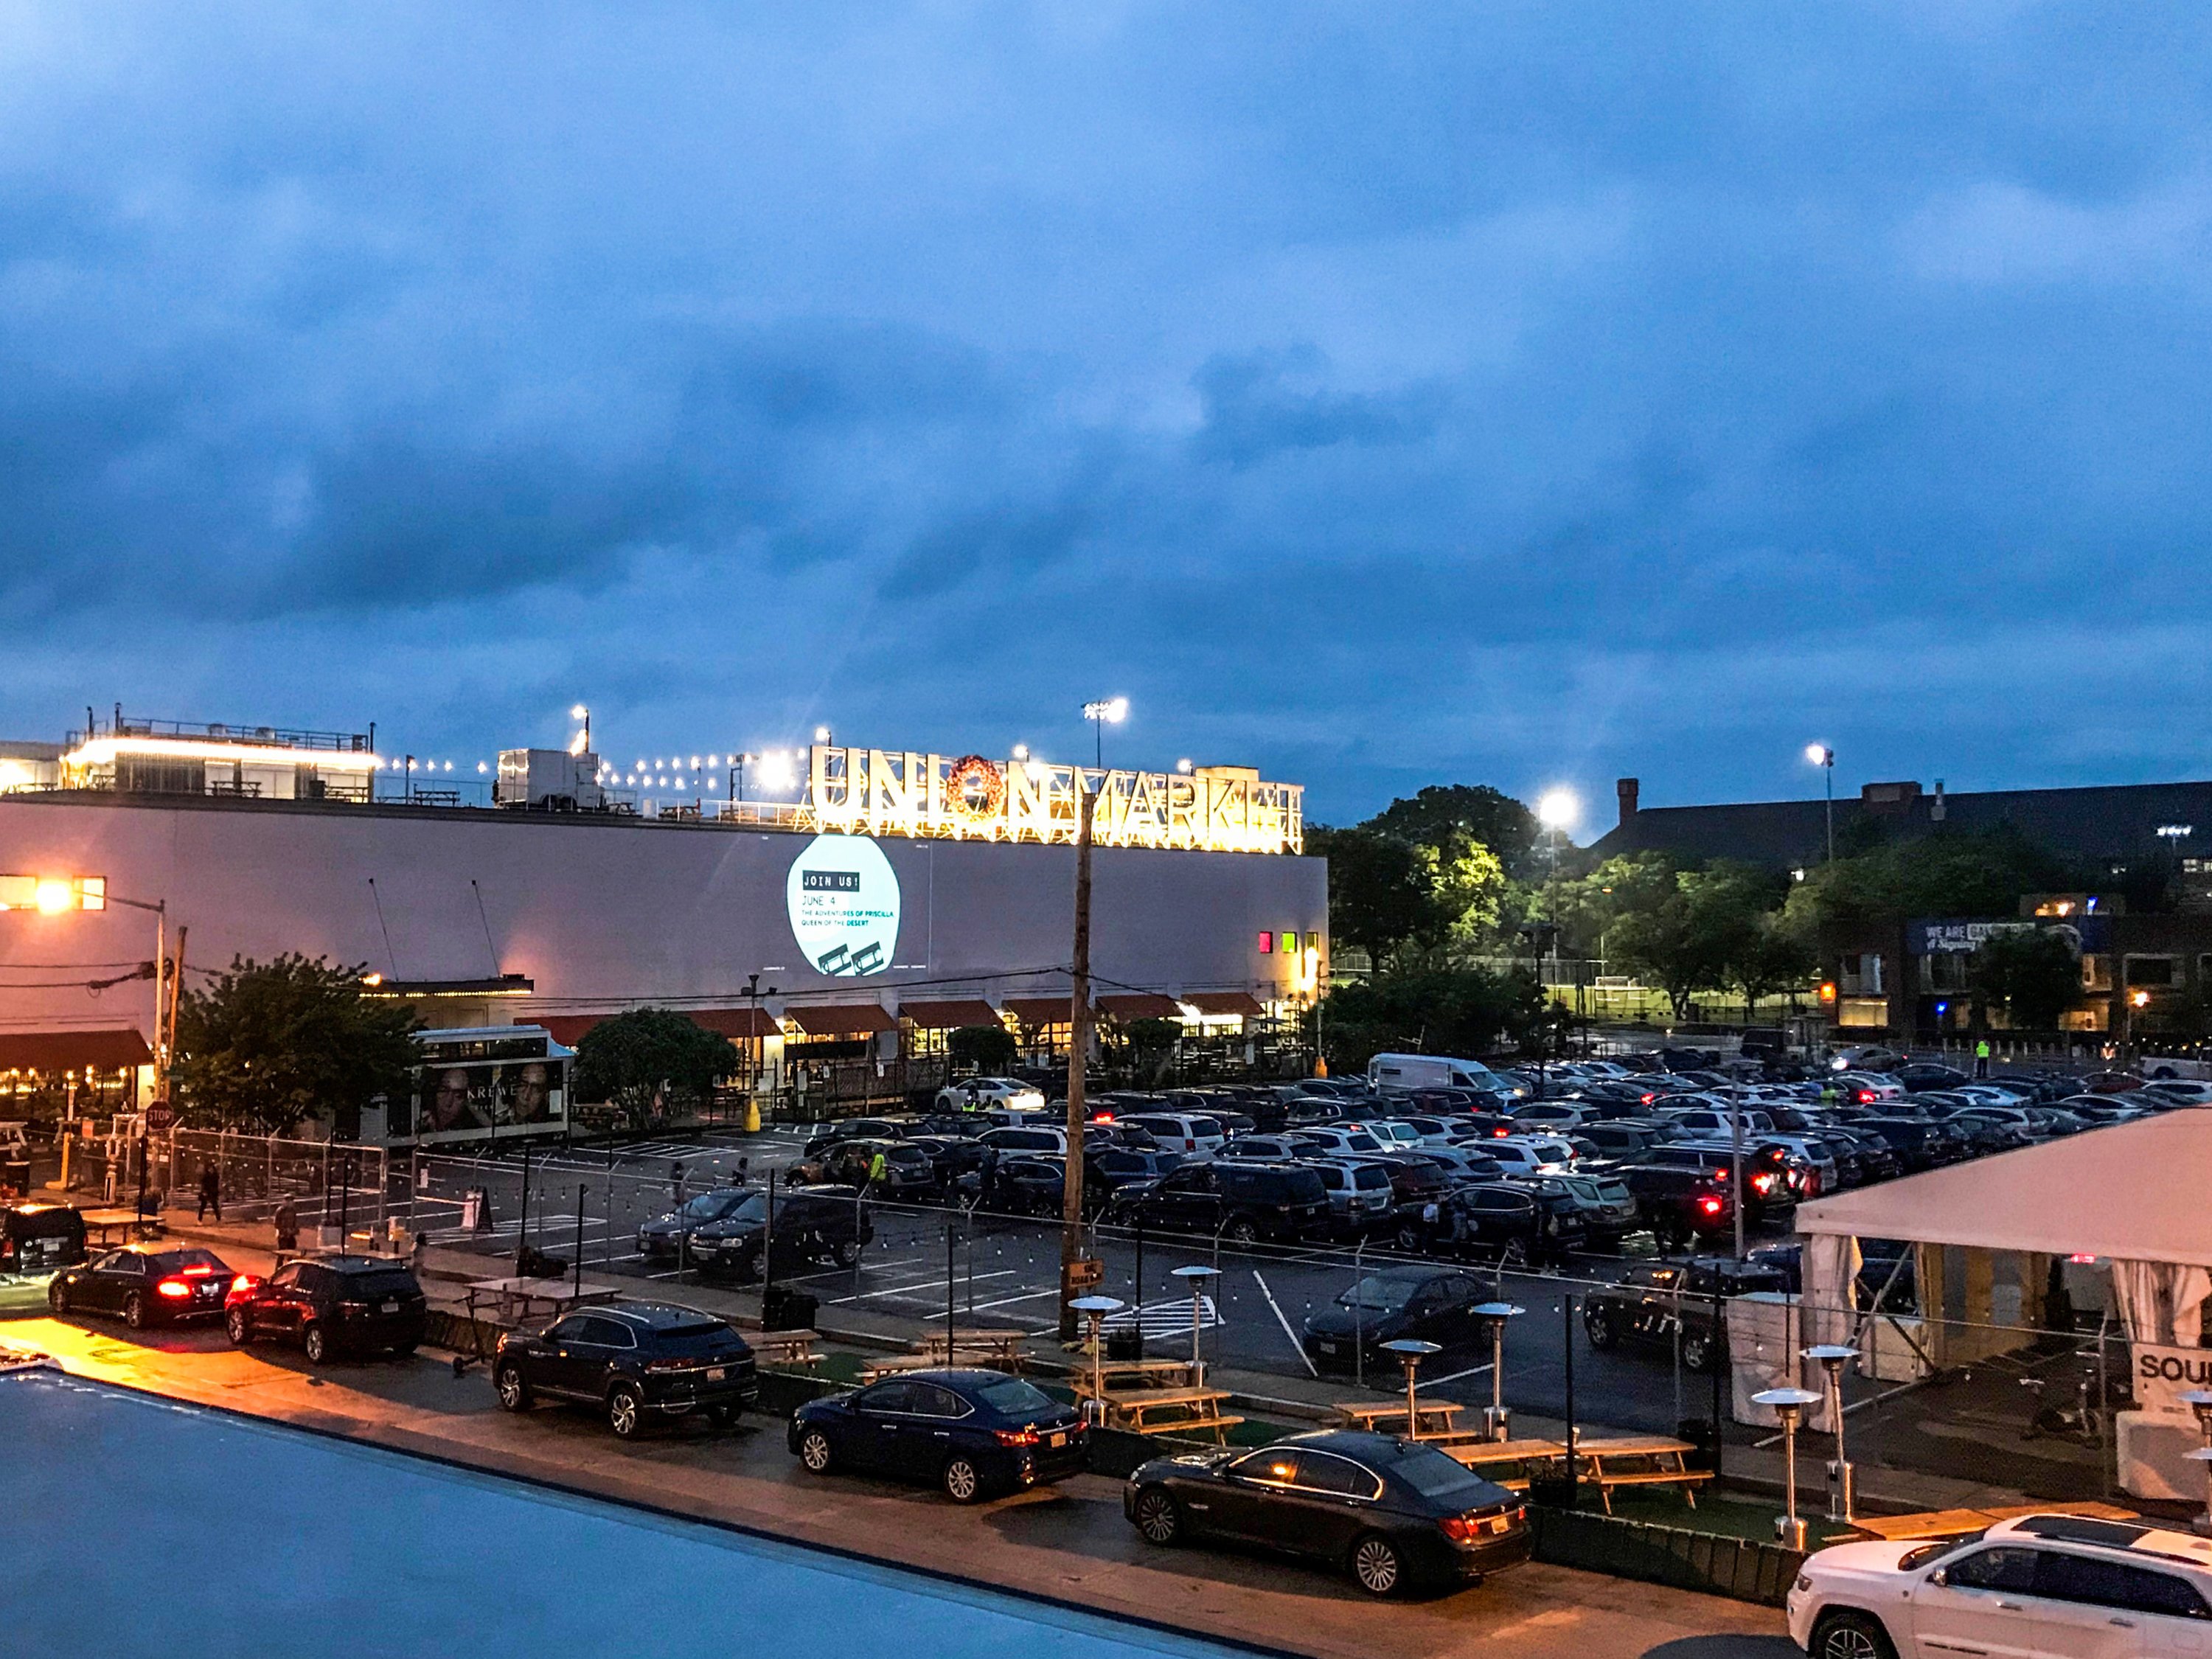 Union Market's outdoor movie series in 2021. Photograph courtesy of EDENS.